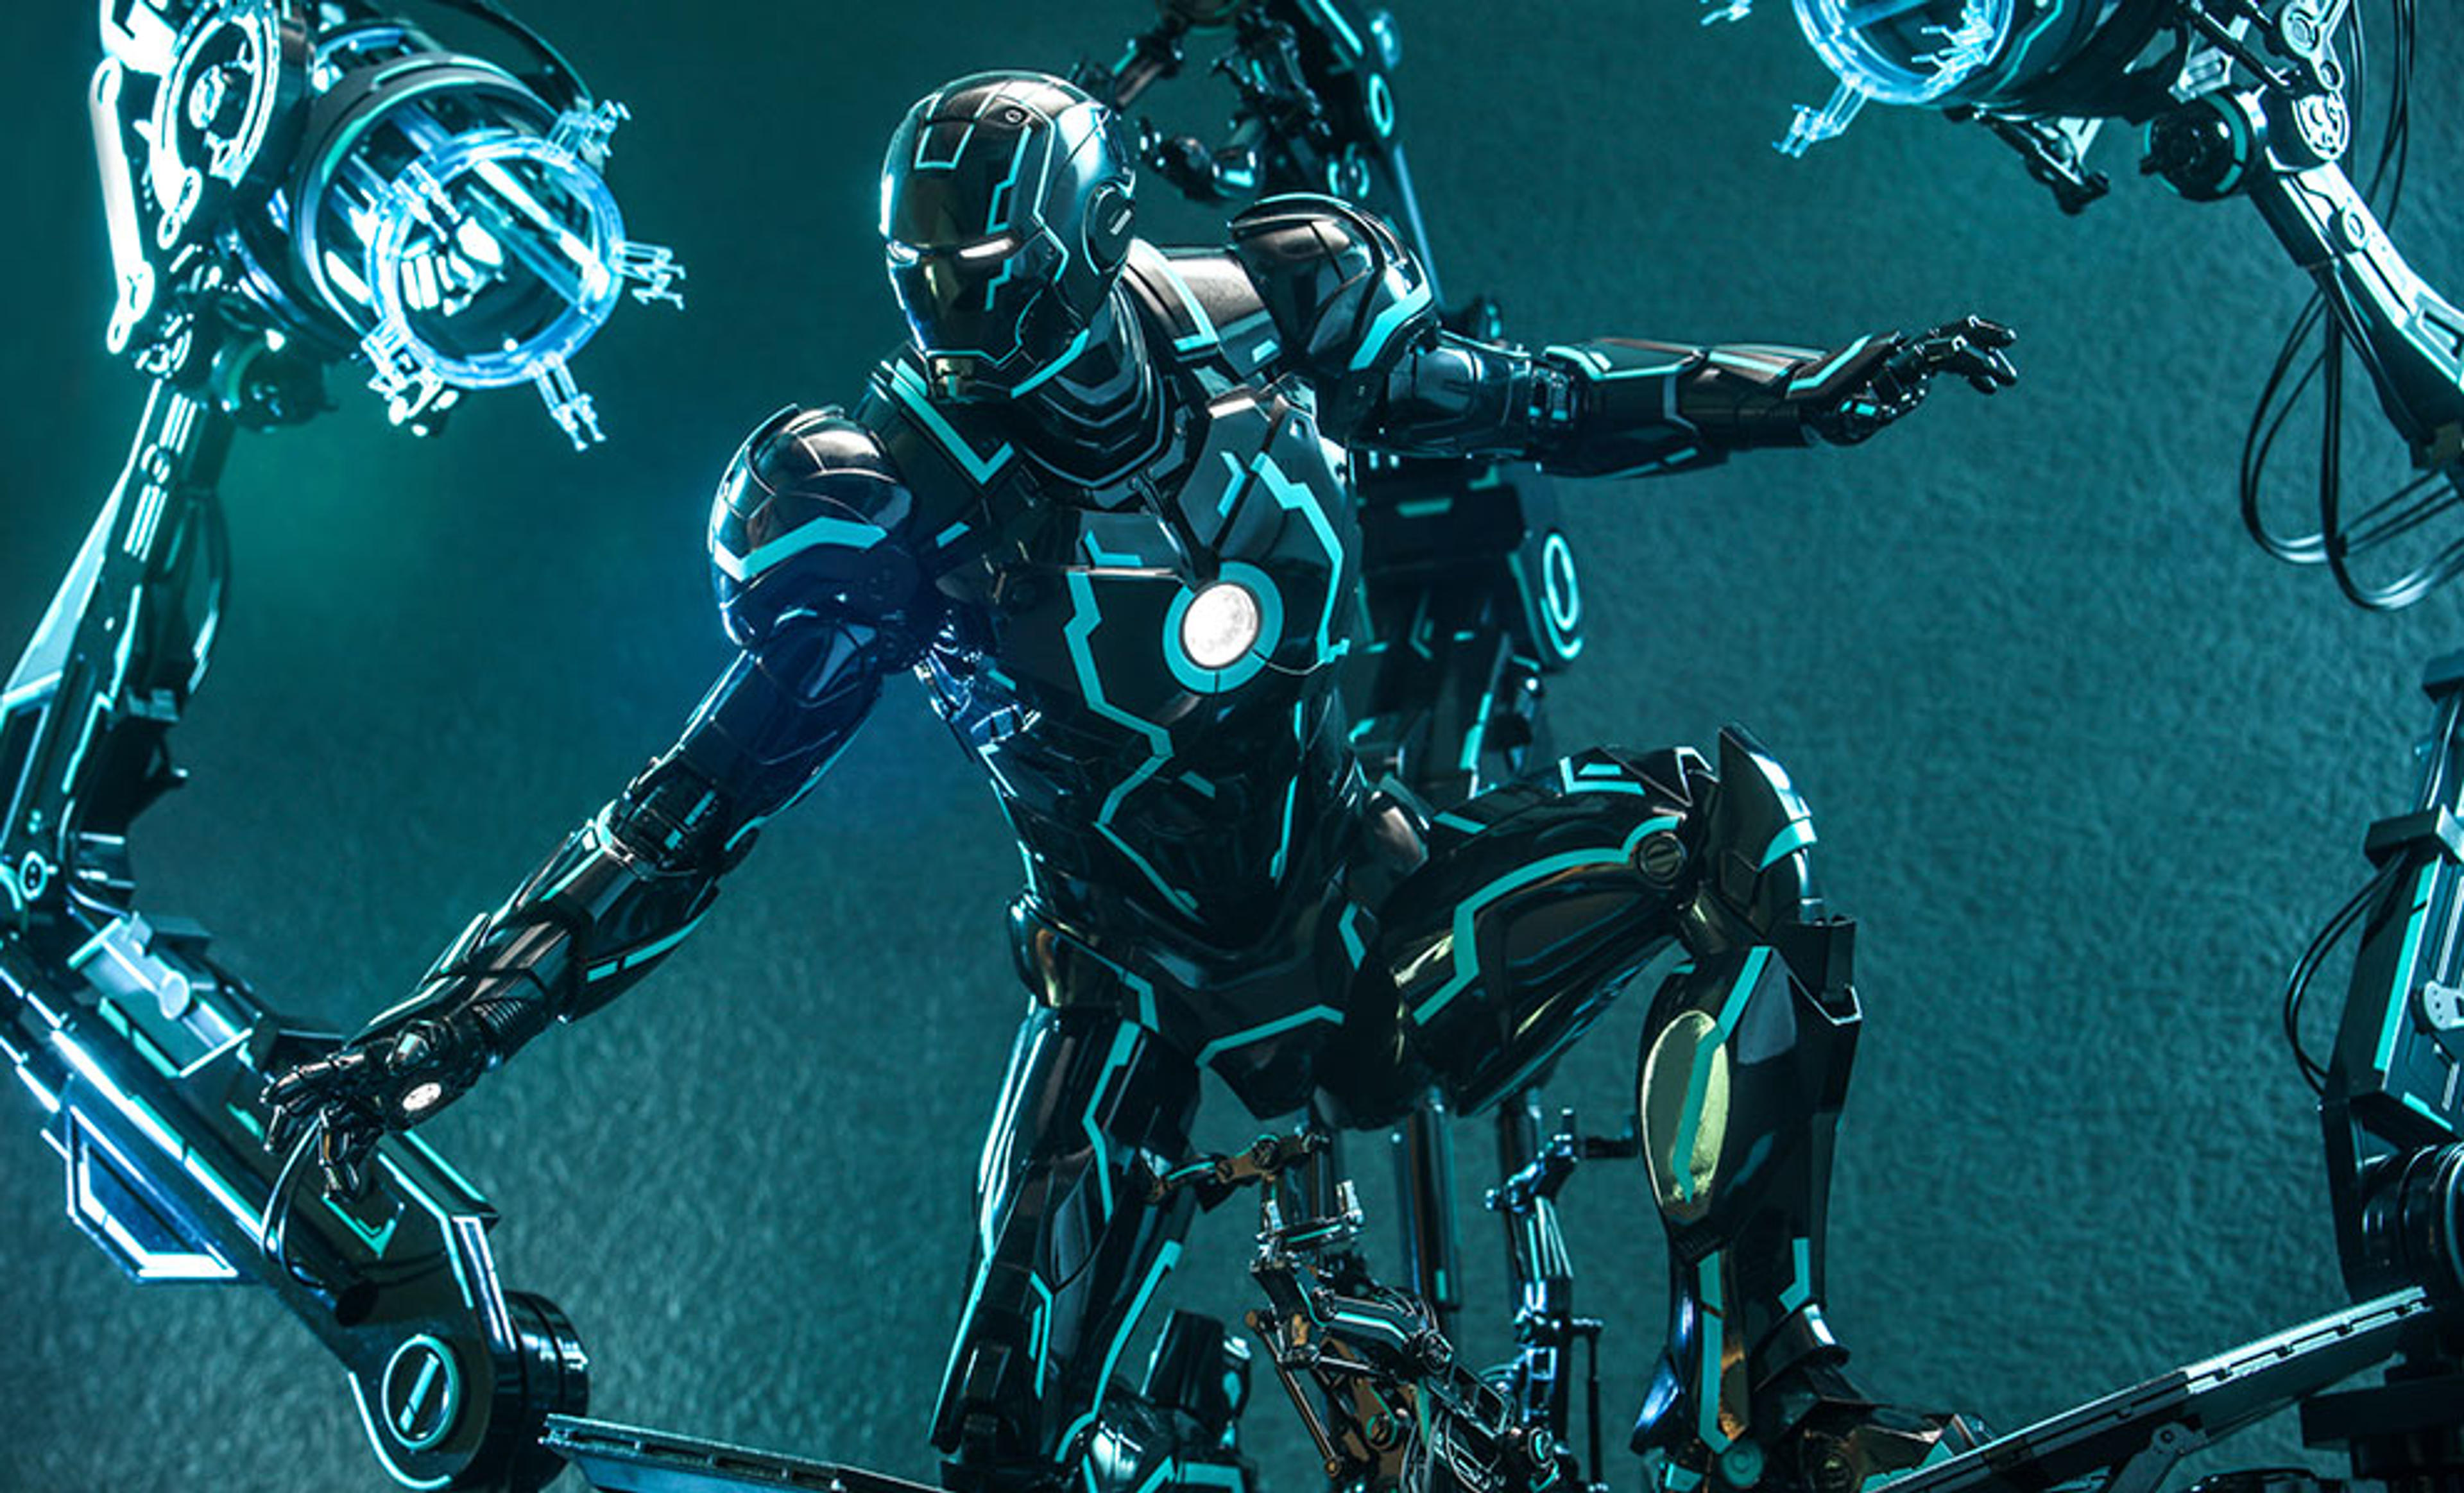 Neon Tech Iron Man with Suit-Up Gantry Sixth Scale Figure Set by Hot Toys | Sideshow Collectibles